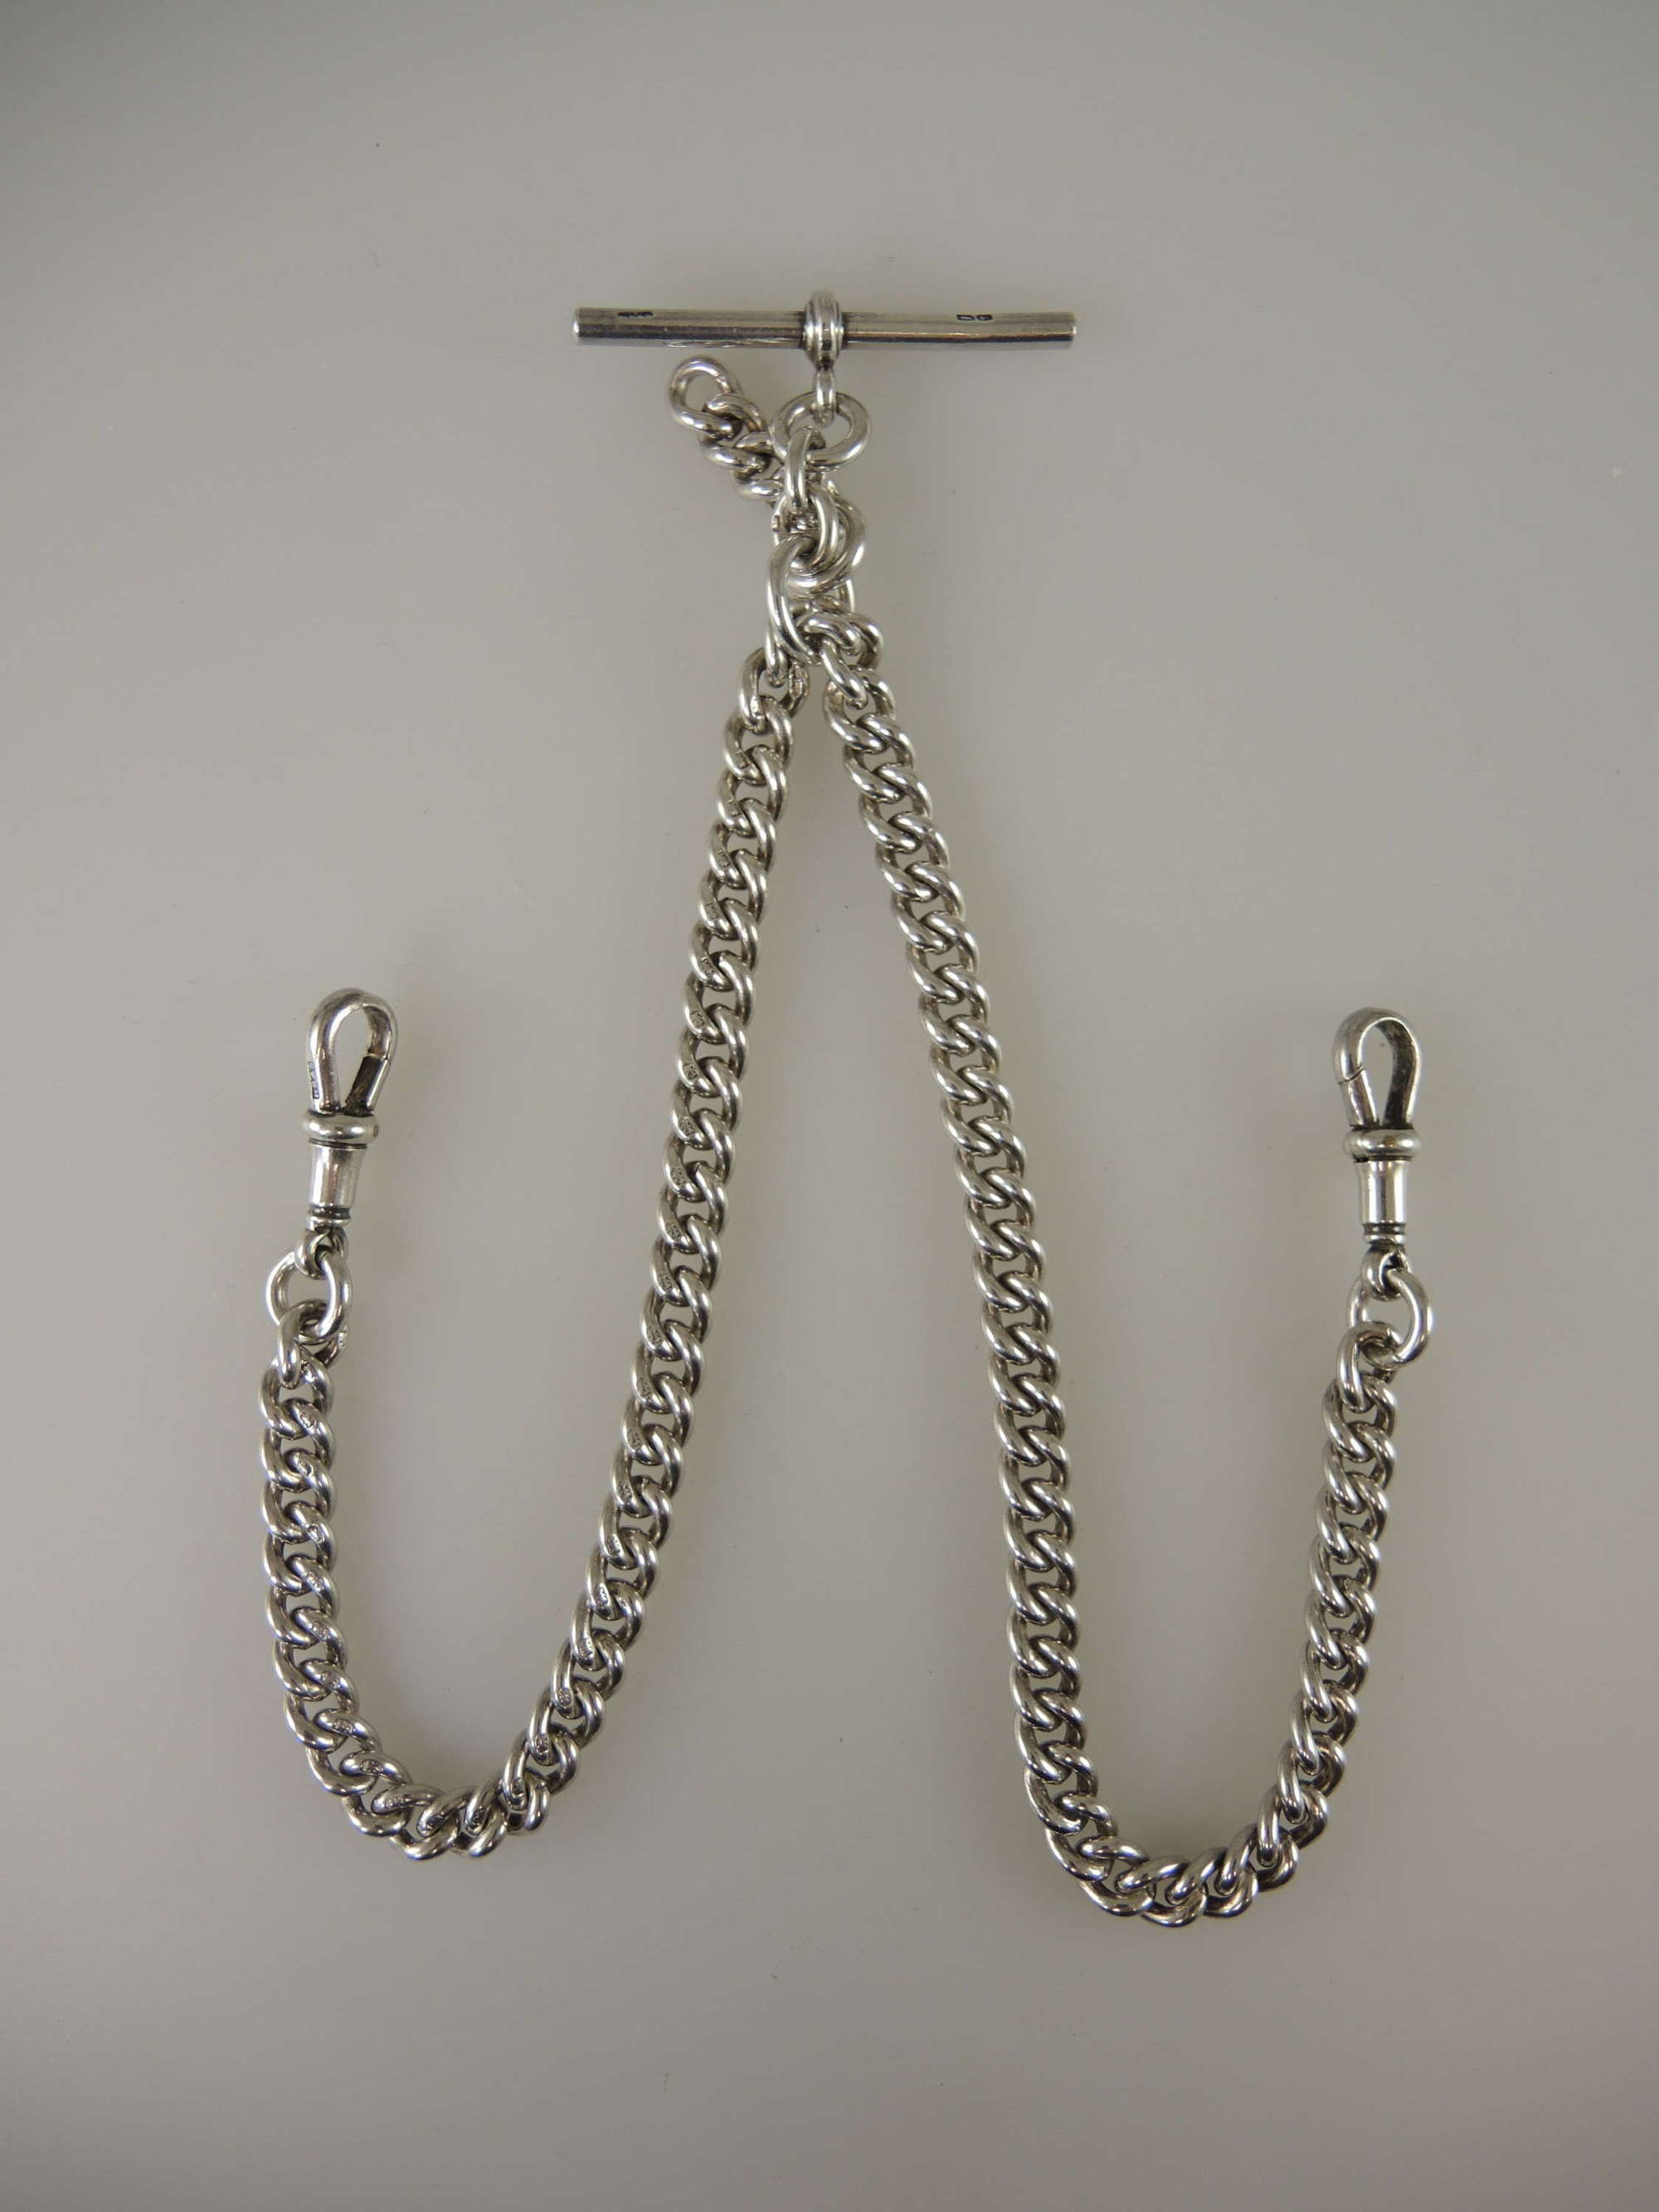 Superb example of an English silver pocket watch chain c1939